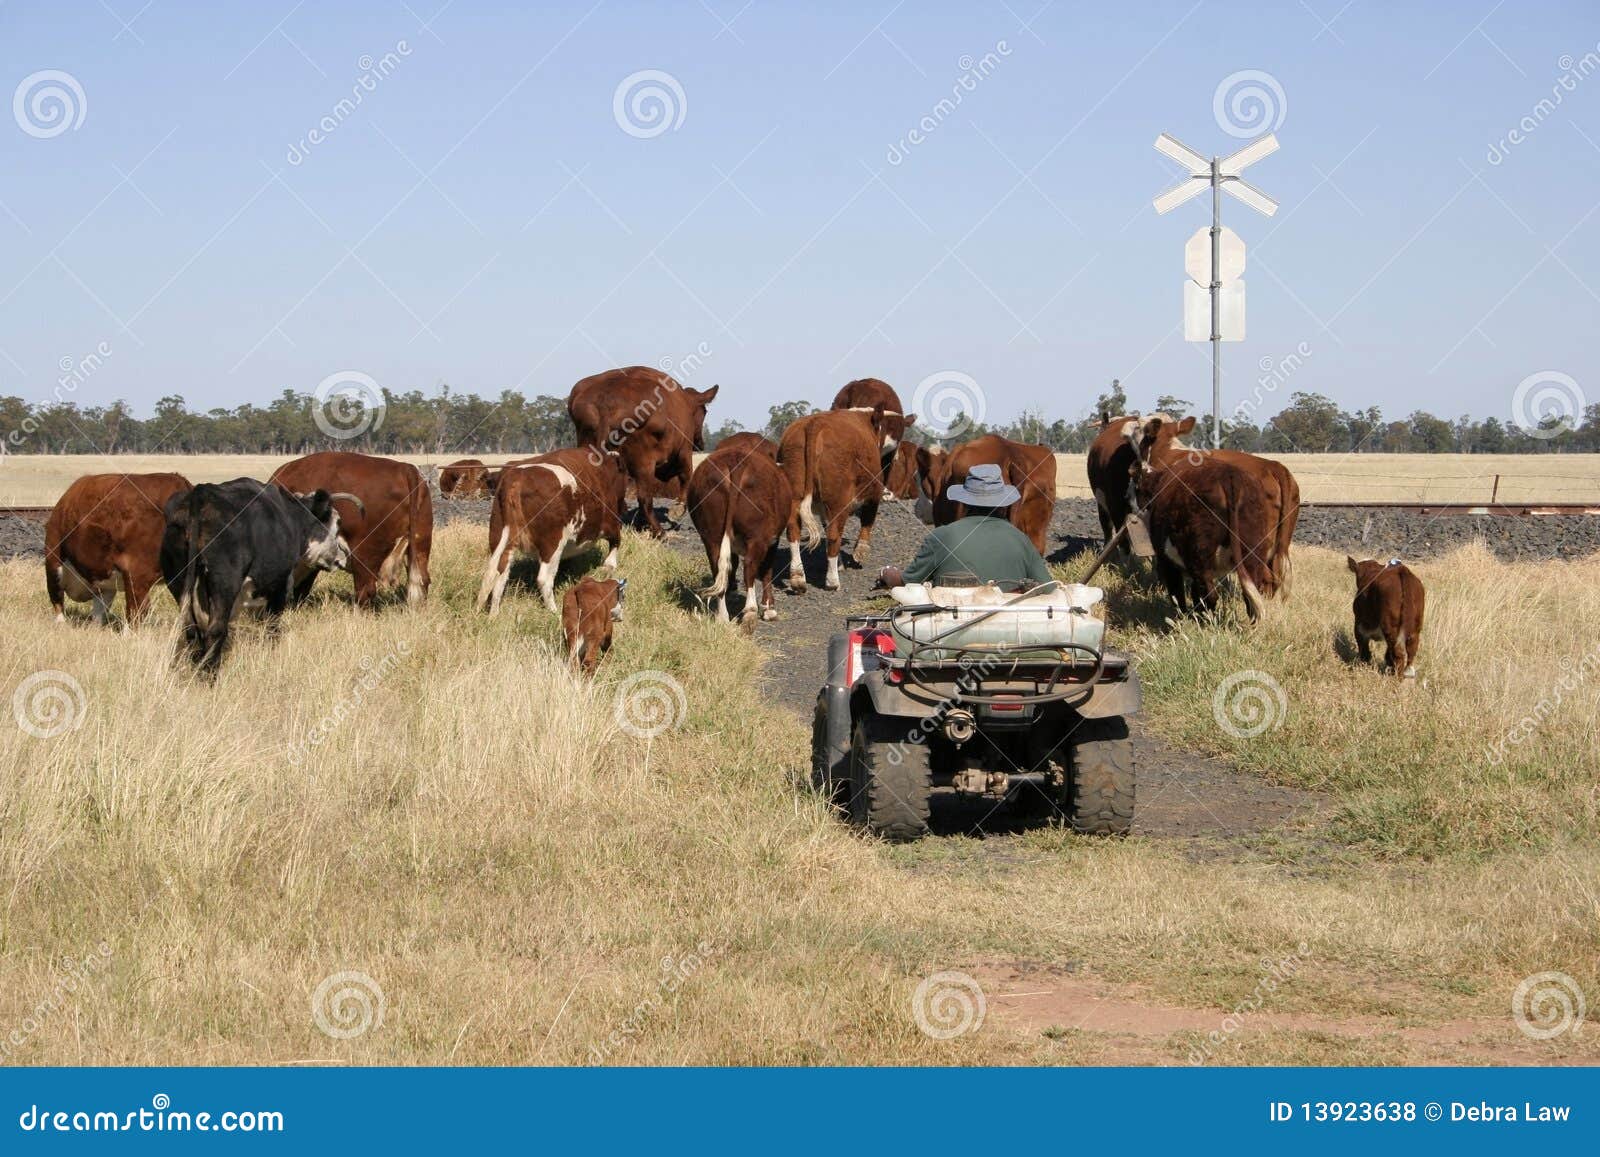 farmer and cattle